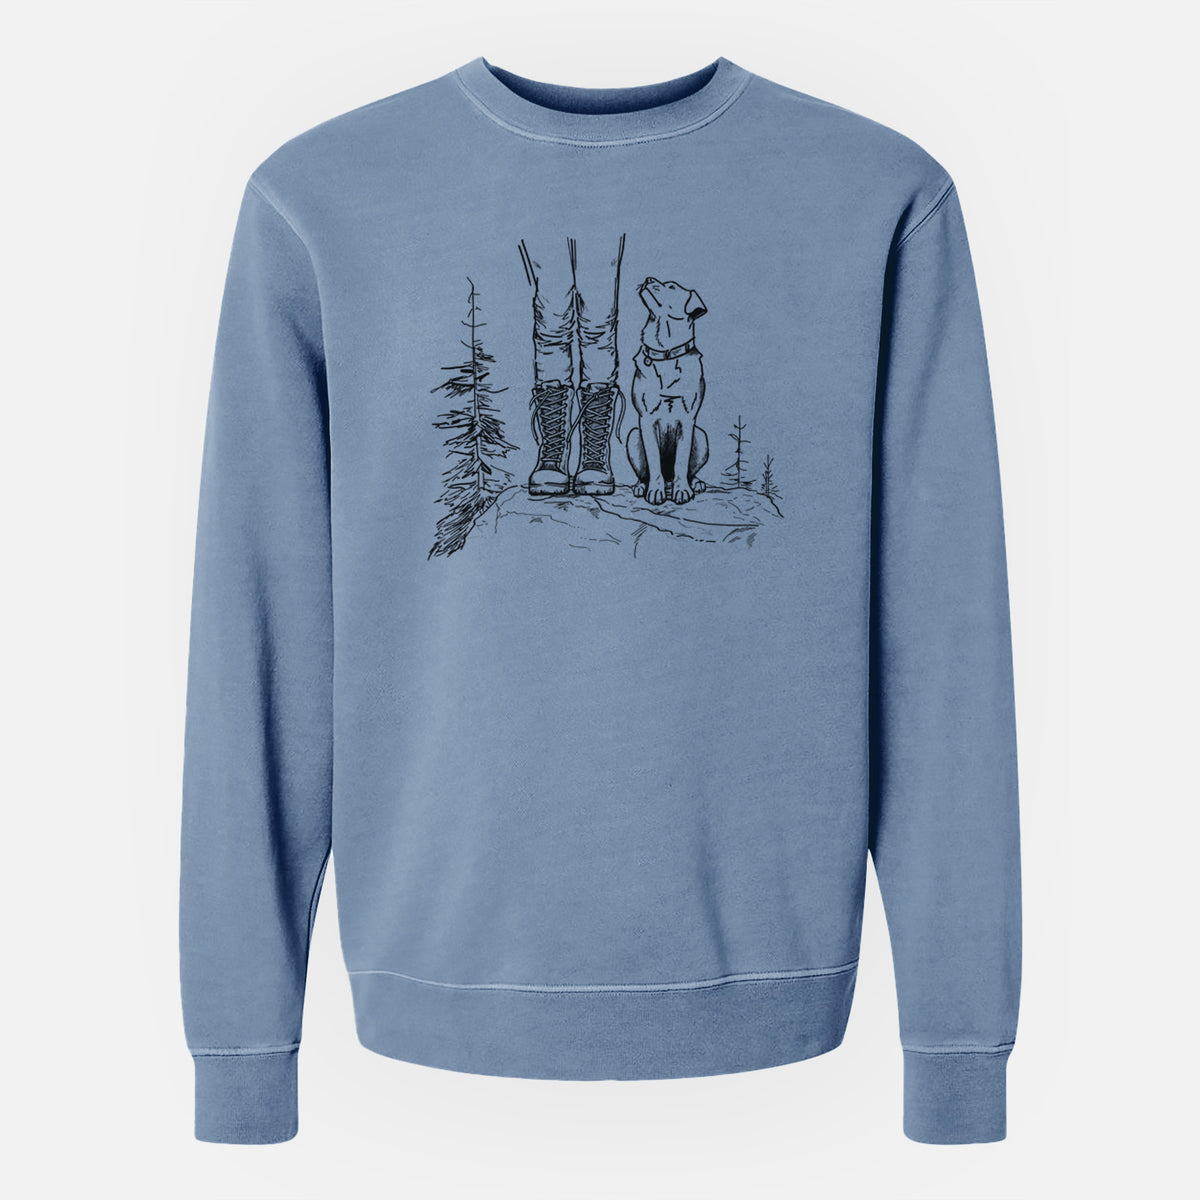 Trail Companions - Hiking with Dogs - Unisex Pigment Dyed Crew Sweatshirt